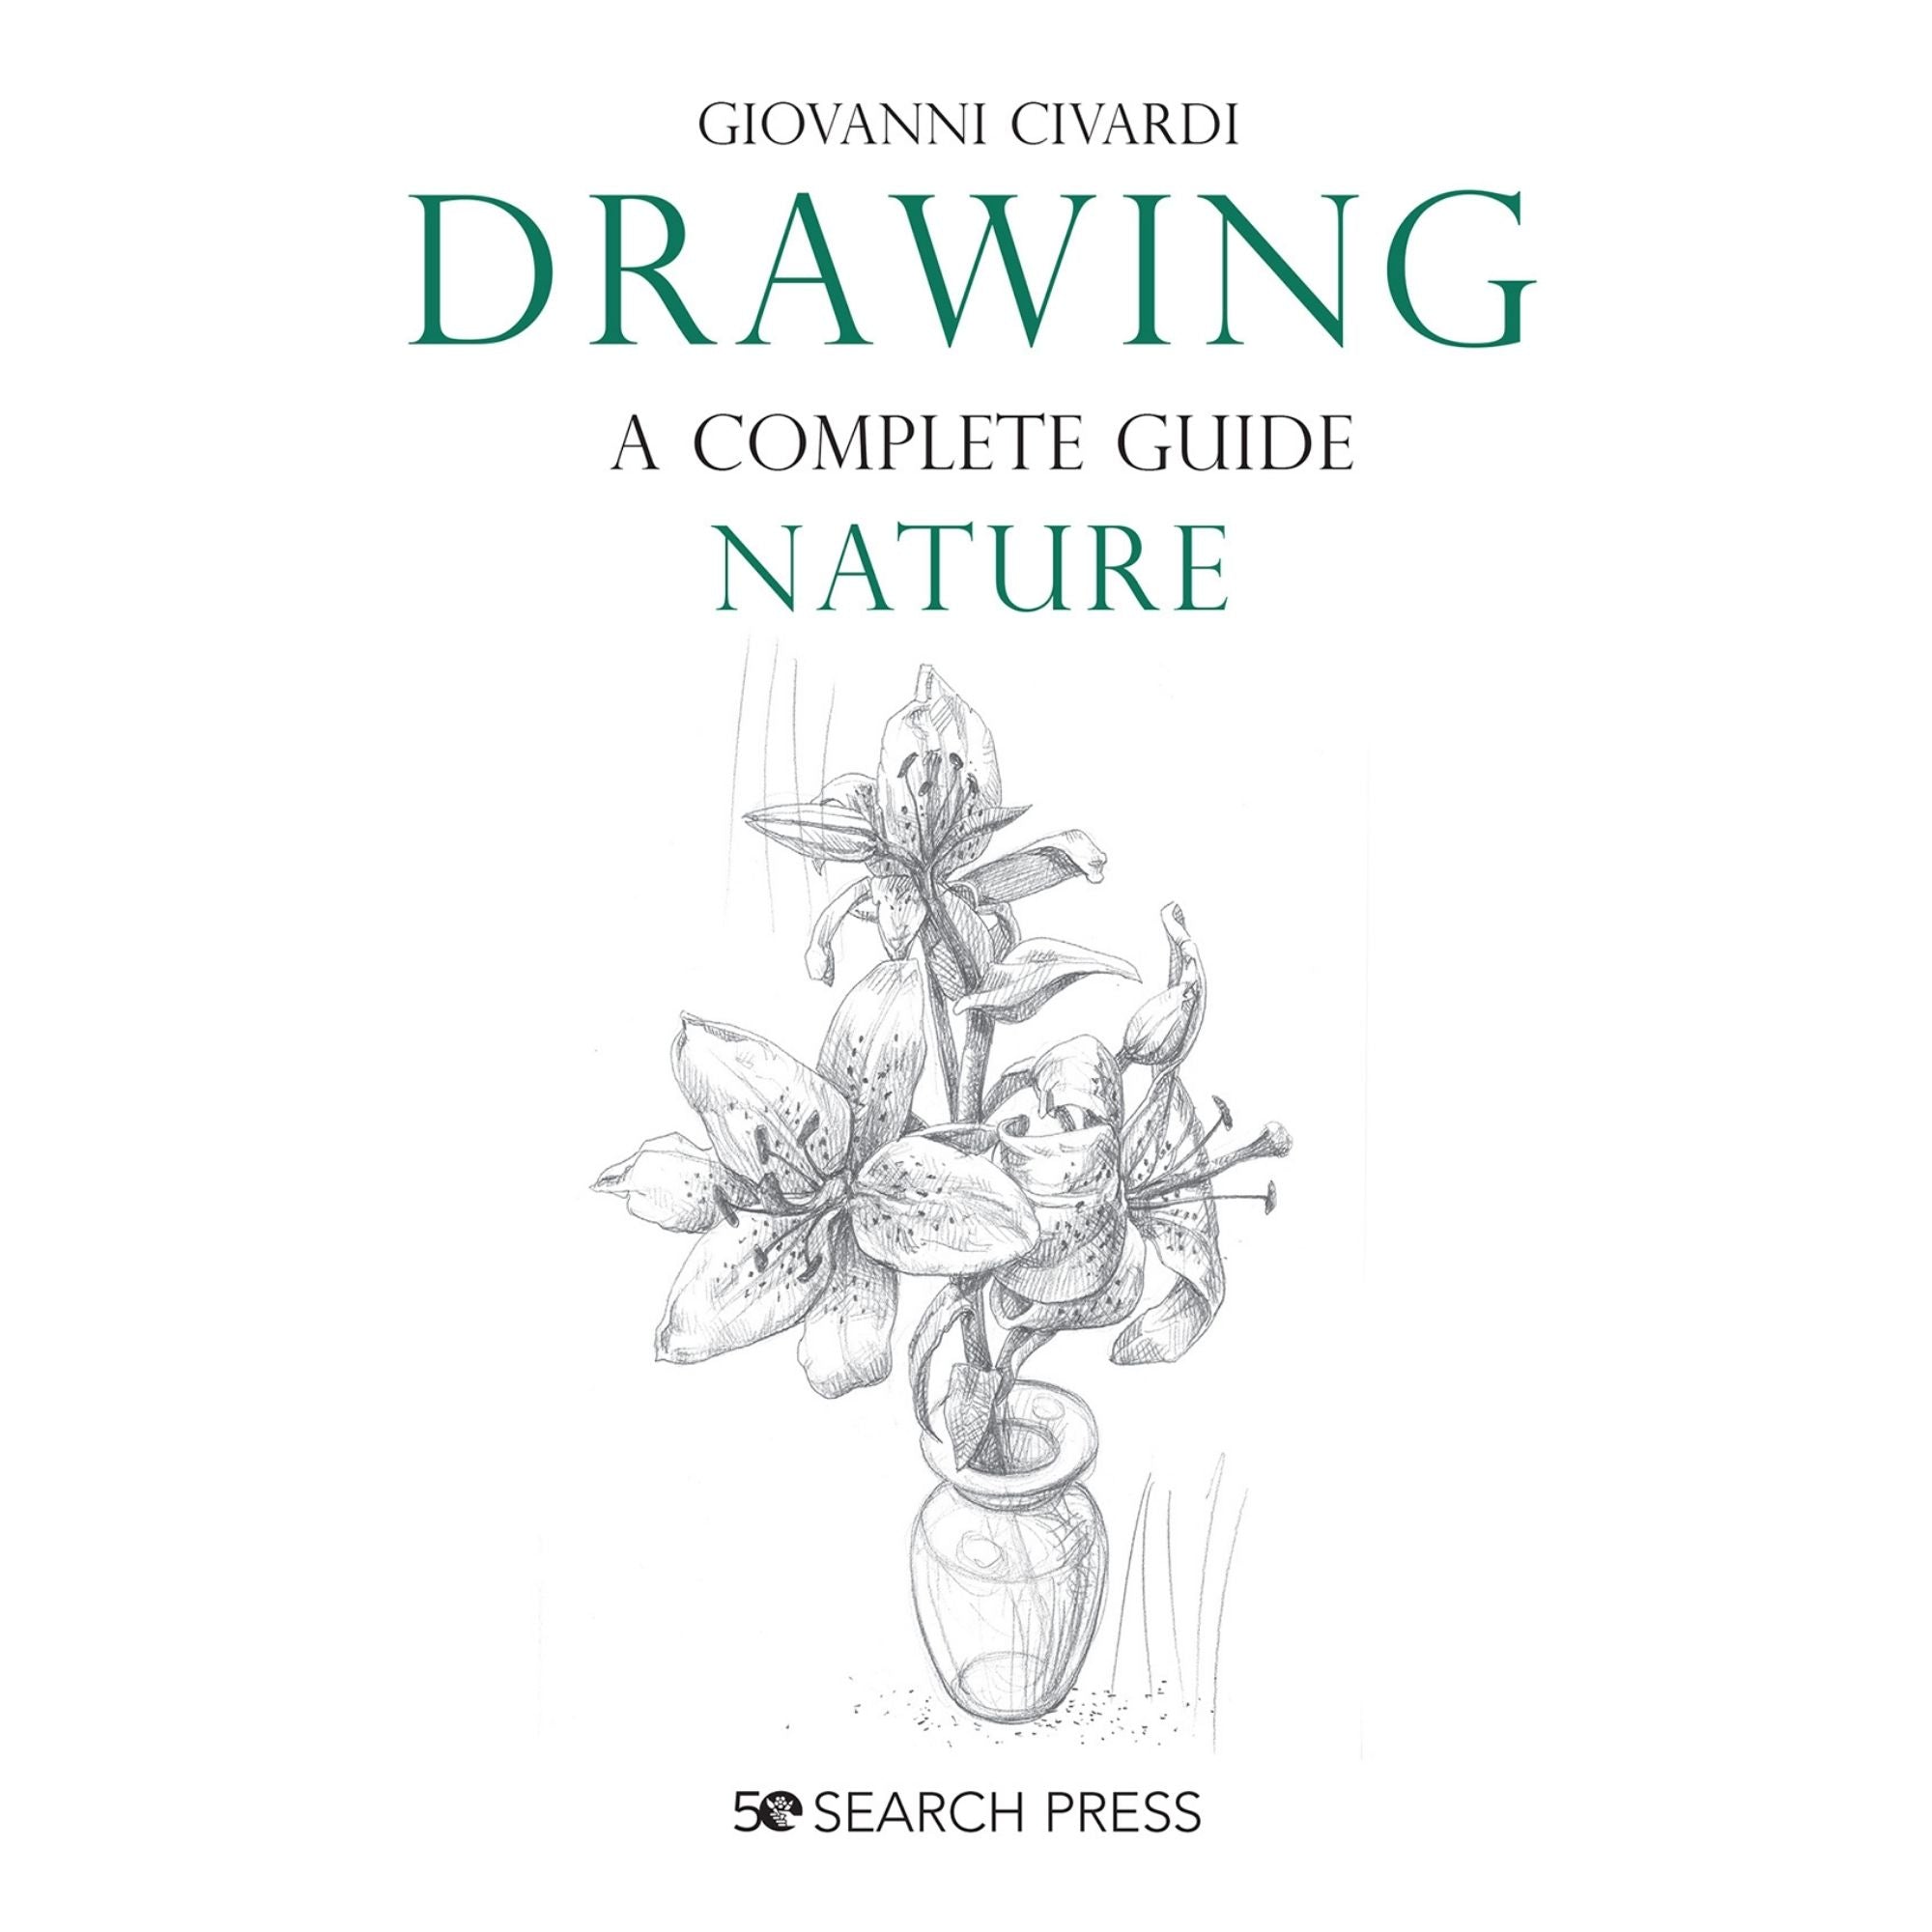 Drawing - A Complete Guide - Nature - G. Civardi - Cover